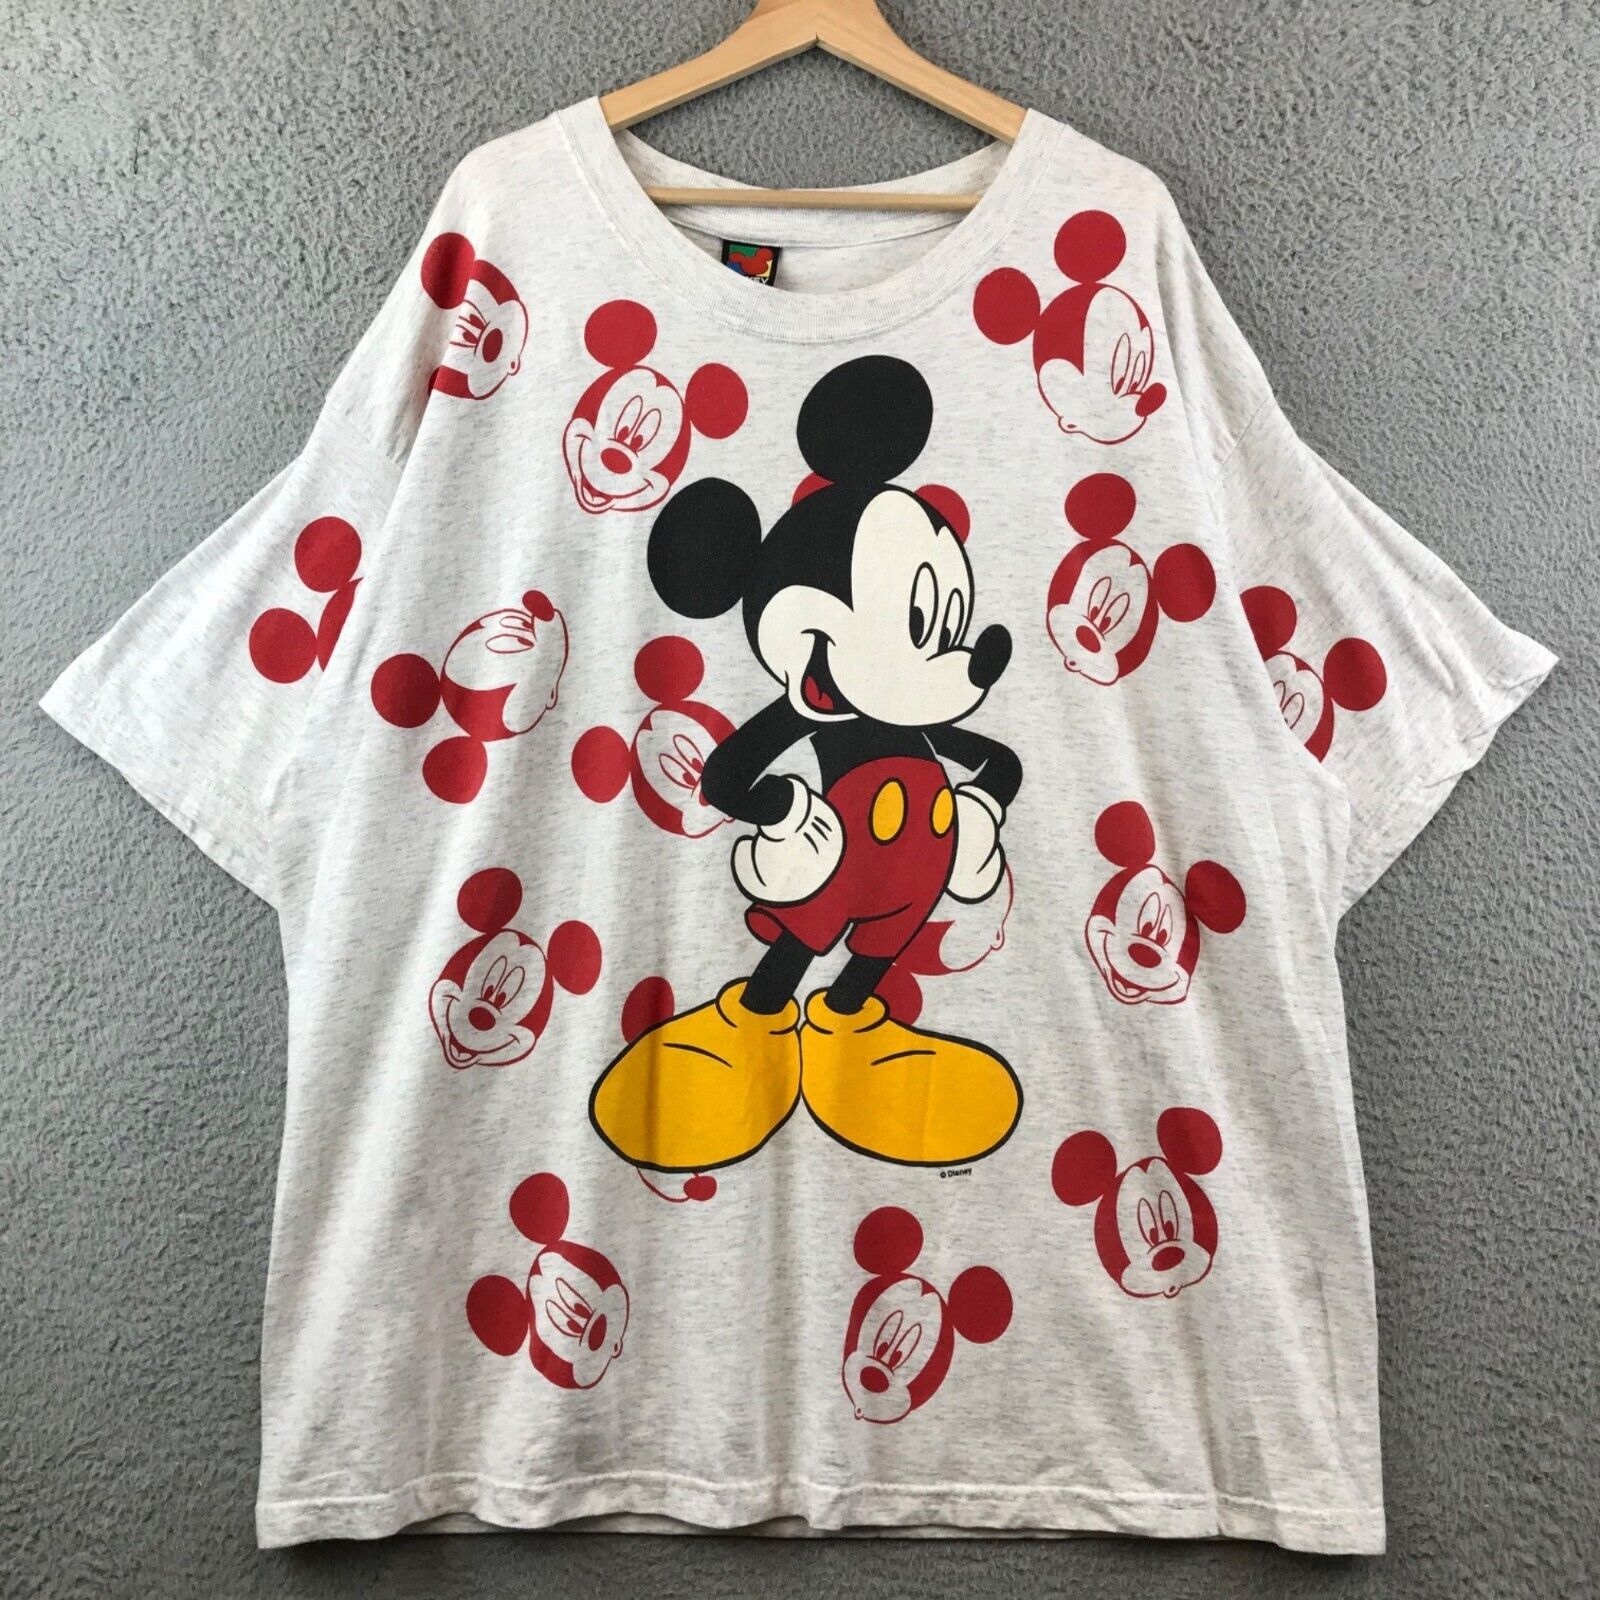 Vintage Mickey Unlimited White T shirt Mickey Mouse All Over Print size 2X